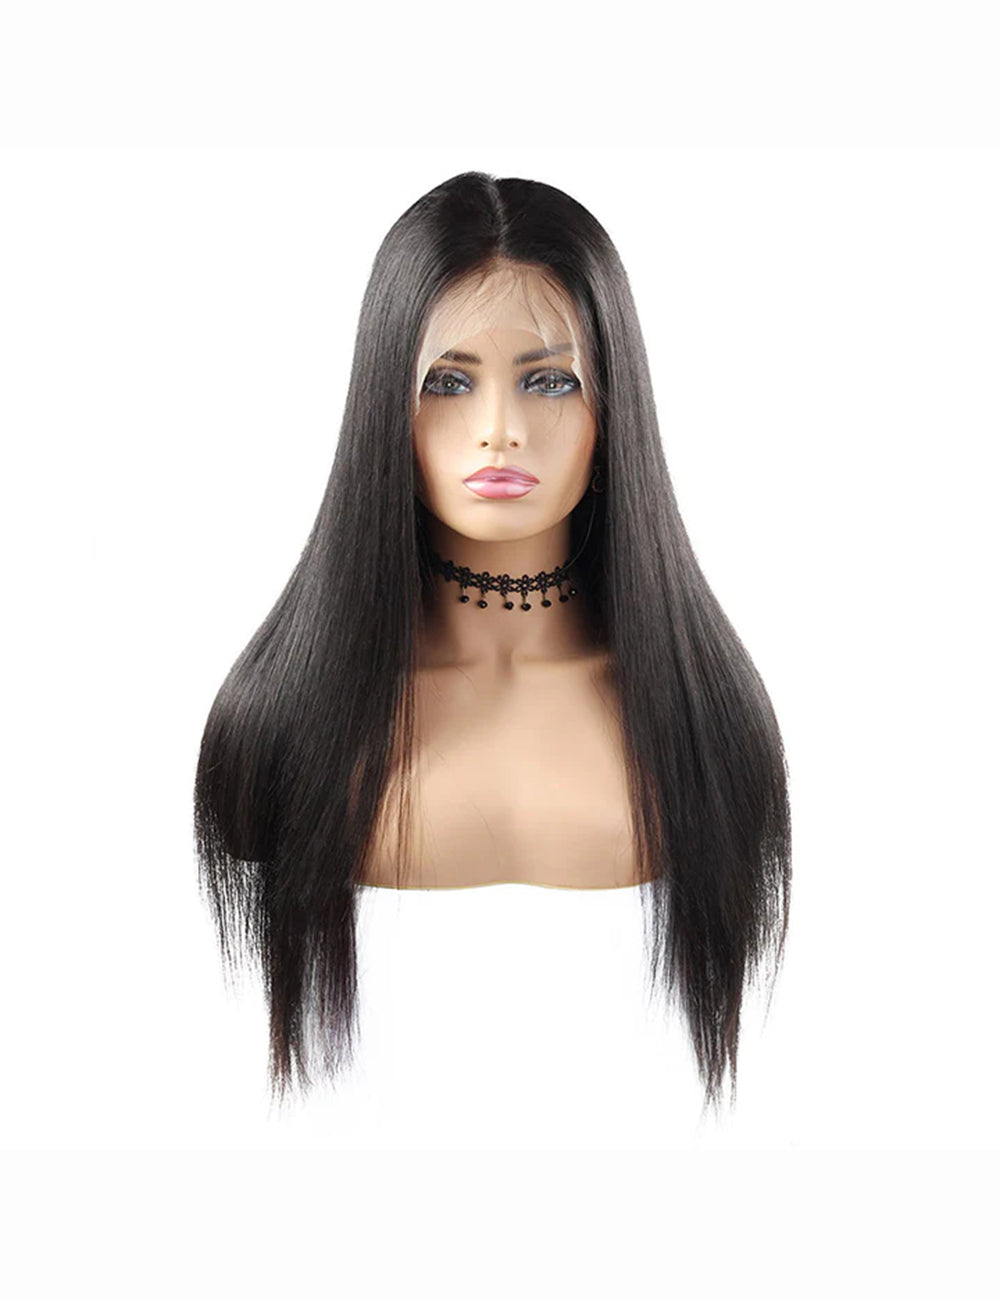 Hair Wigs Peruvian 360 Lace Front Straight Human Hair Wig